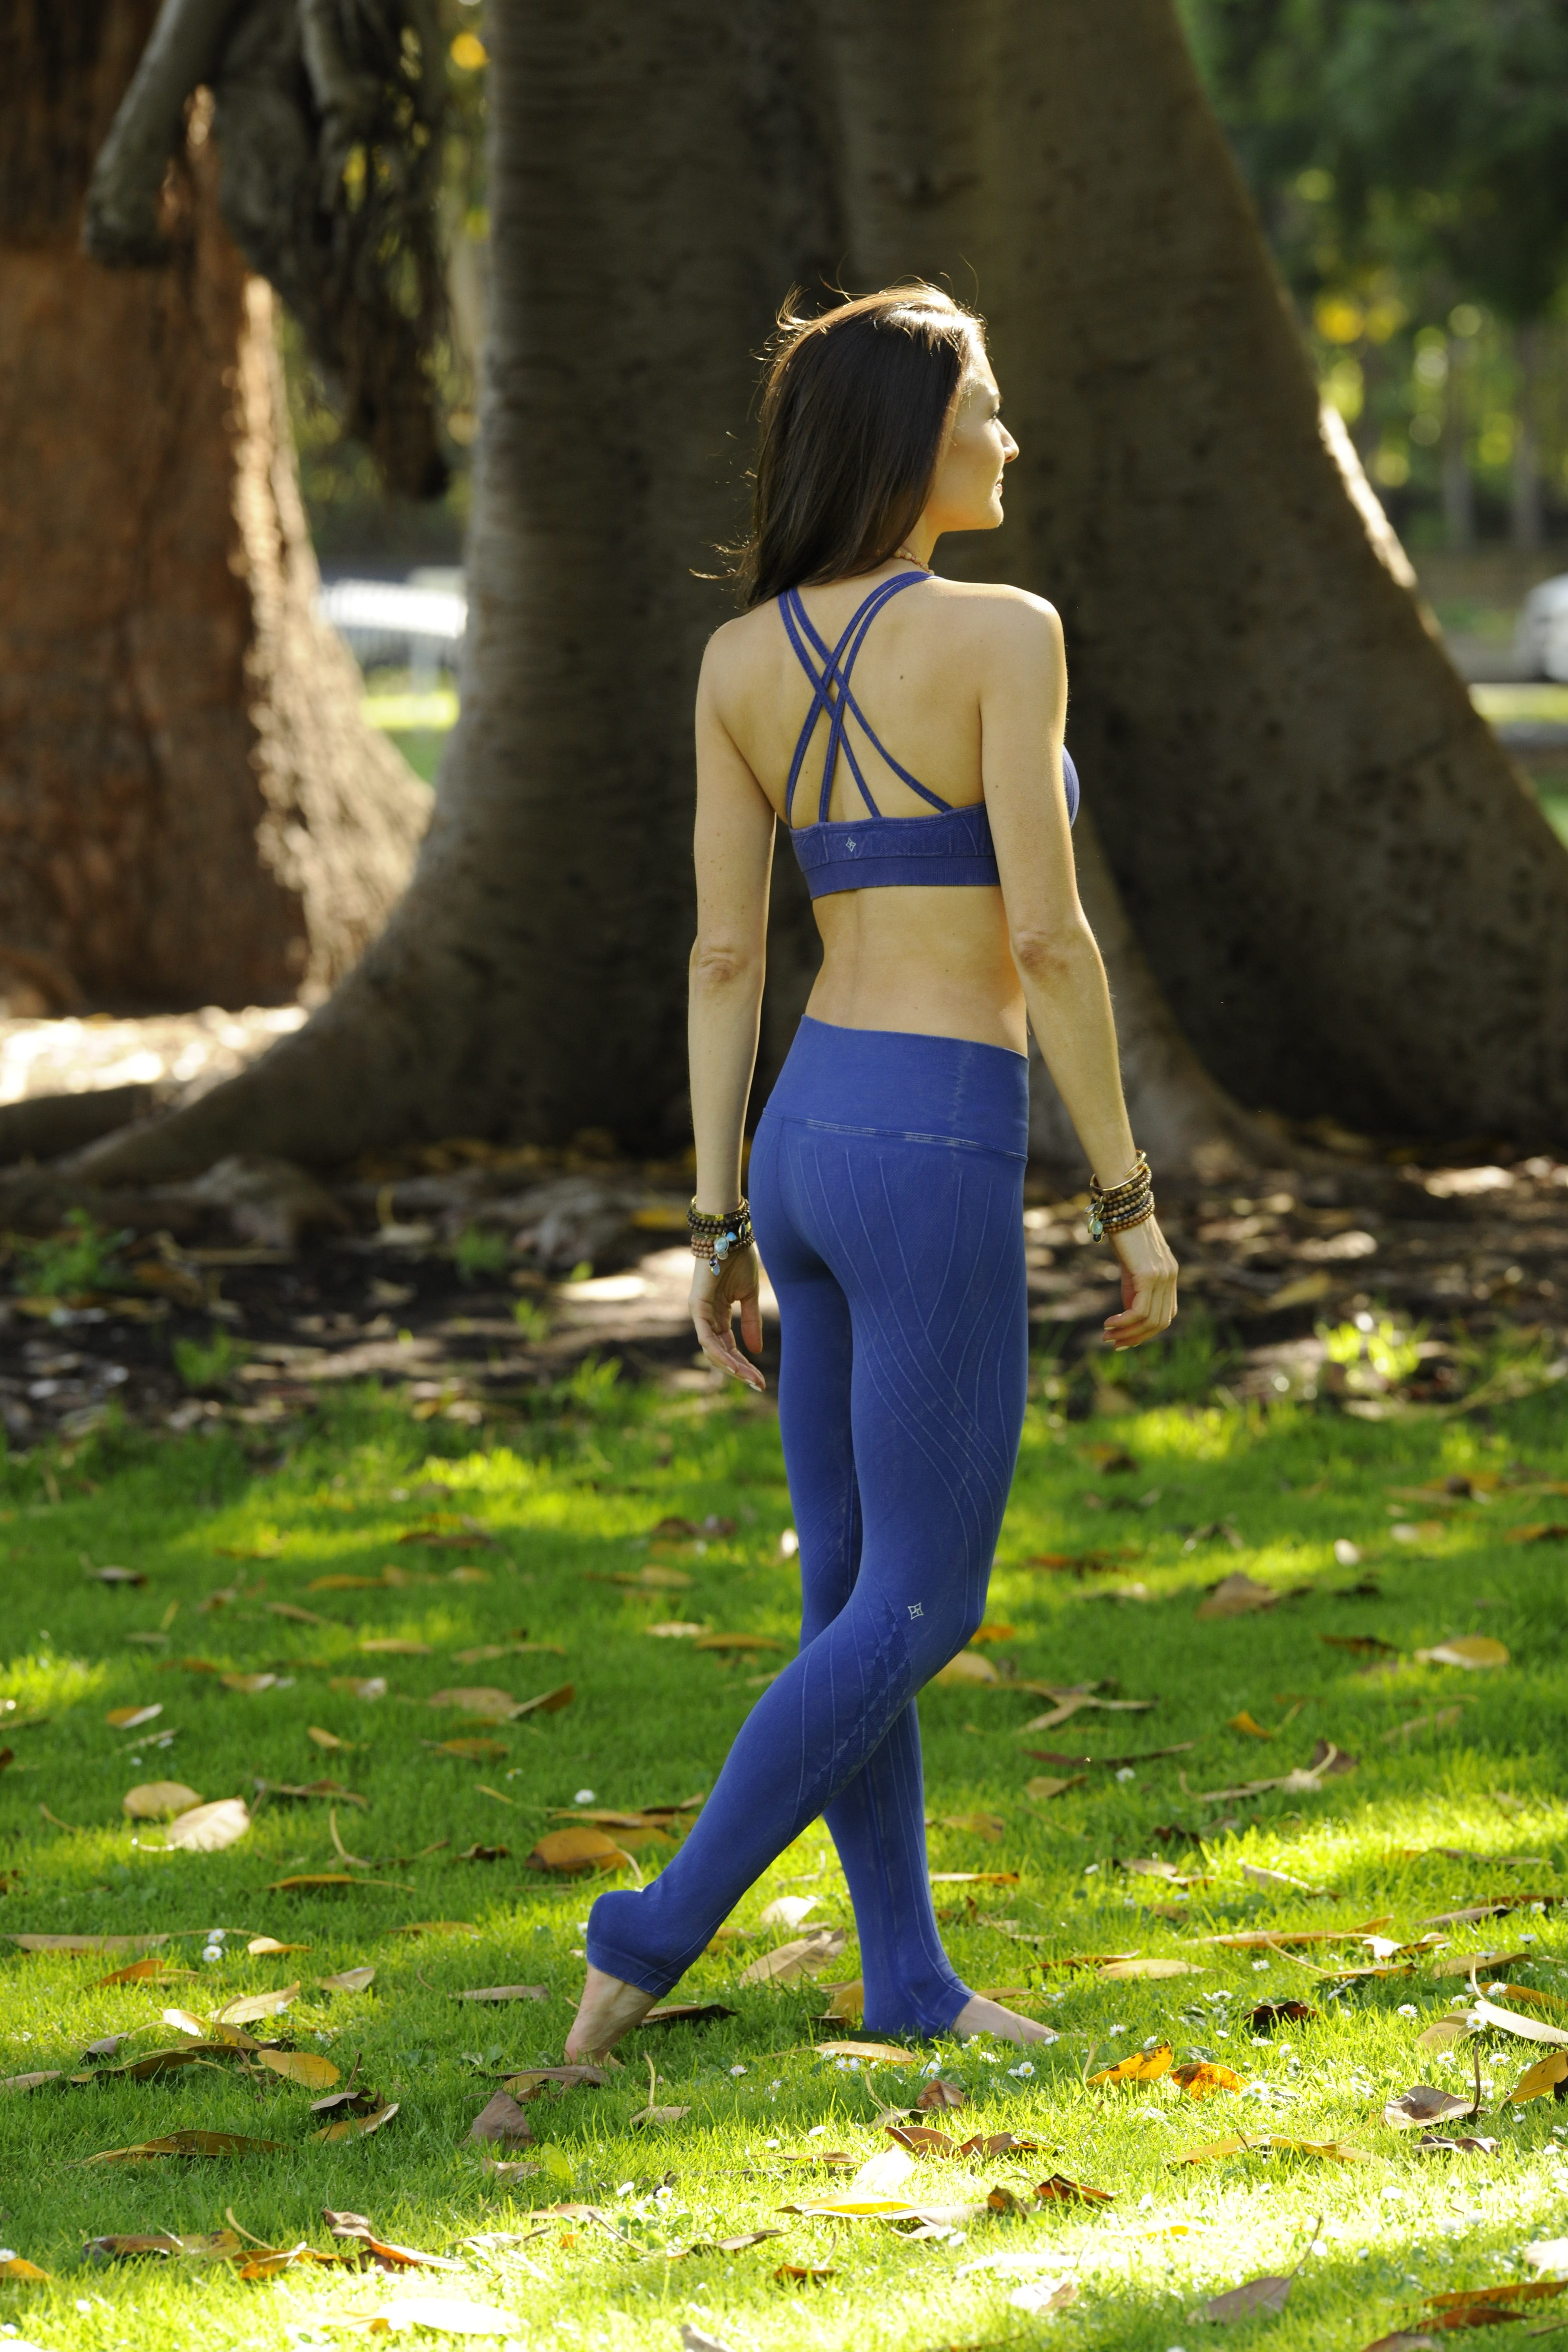 Workout Wear That’s Functional, Fashionable and Soaks Up Your Sweat; Nux Active